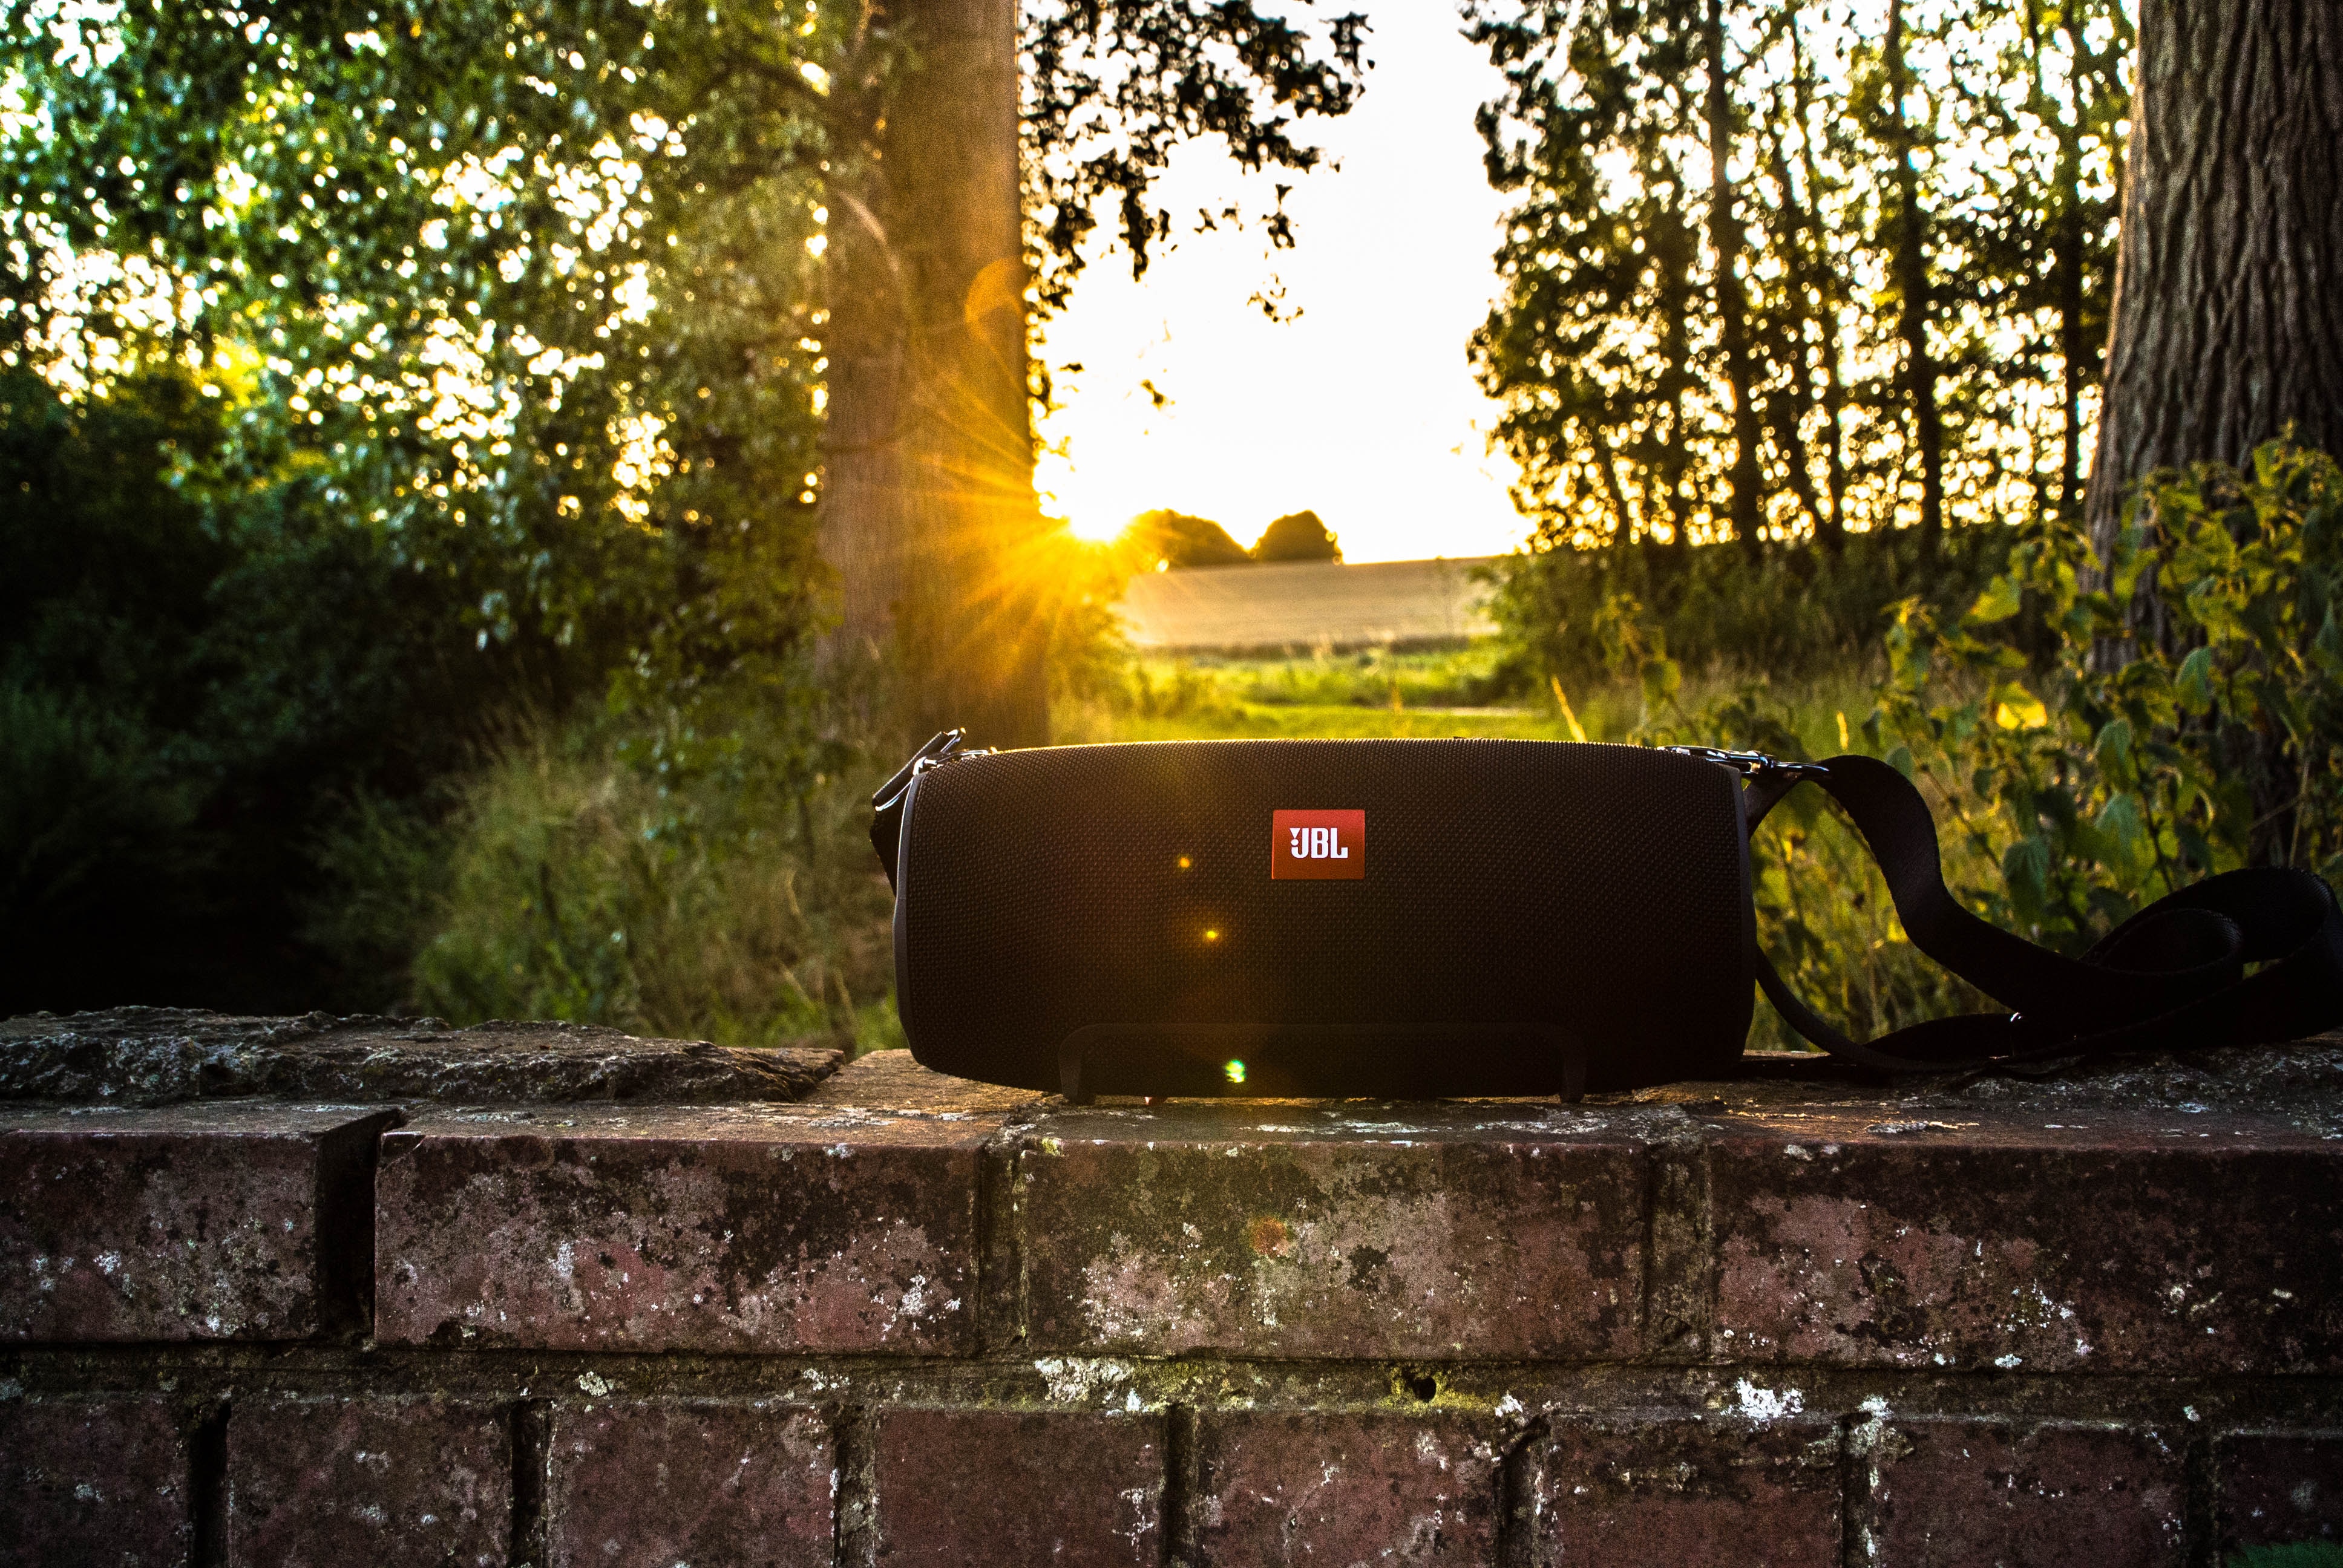 JBL speaker sitting on a brick wall with the sun shining through